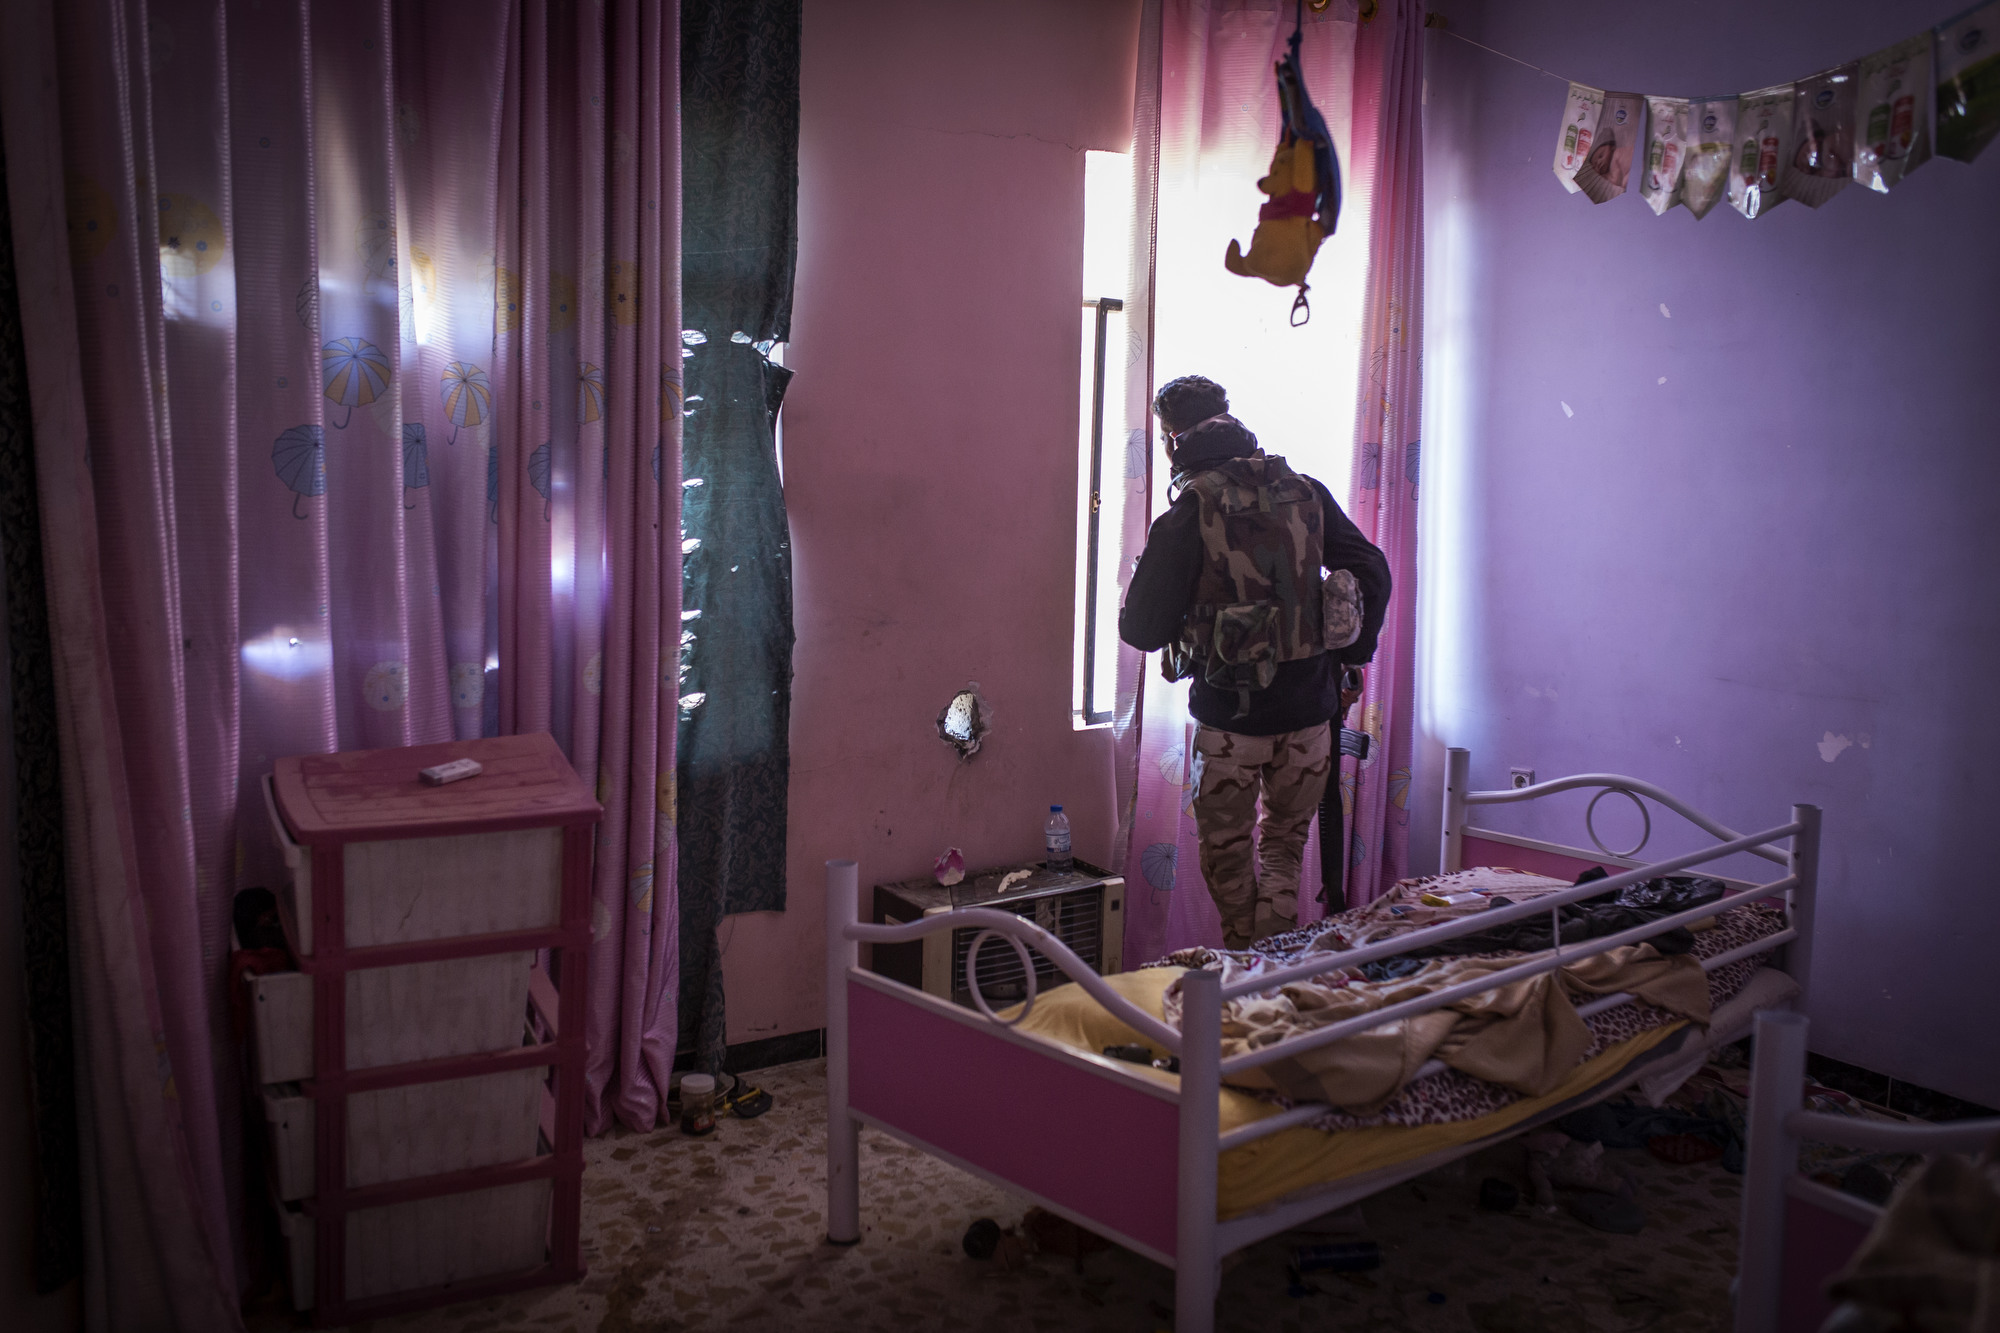  An Iraqi soldier peers through the window of a child's bedroom during clashes with Islamic State forces in Mosul. 